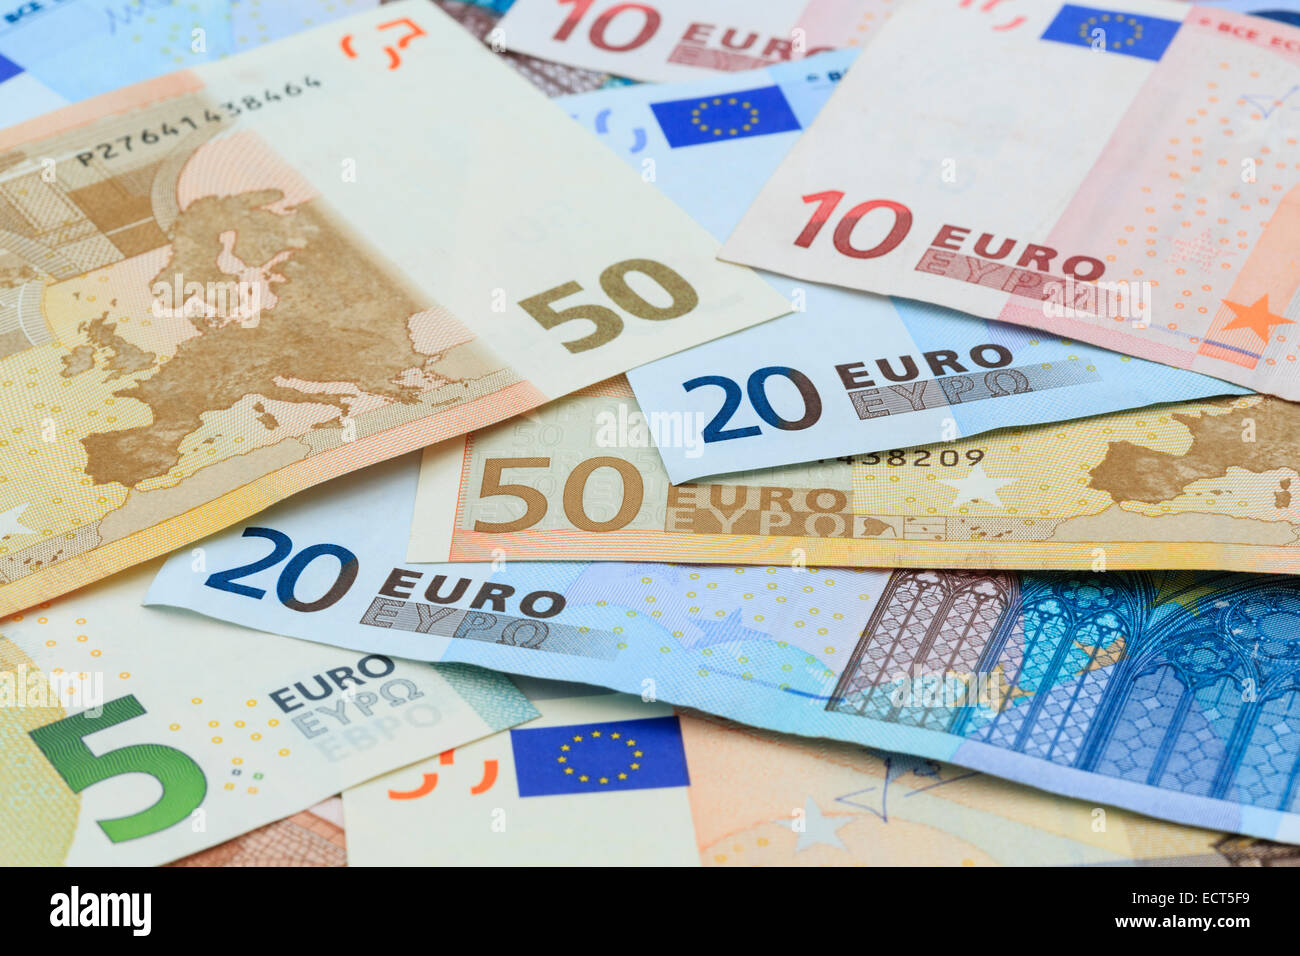 Euros in different denominations of Euro notes from the European Union Eurozone currency in close-up as a background. Europe EU Stock Photo